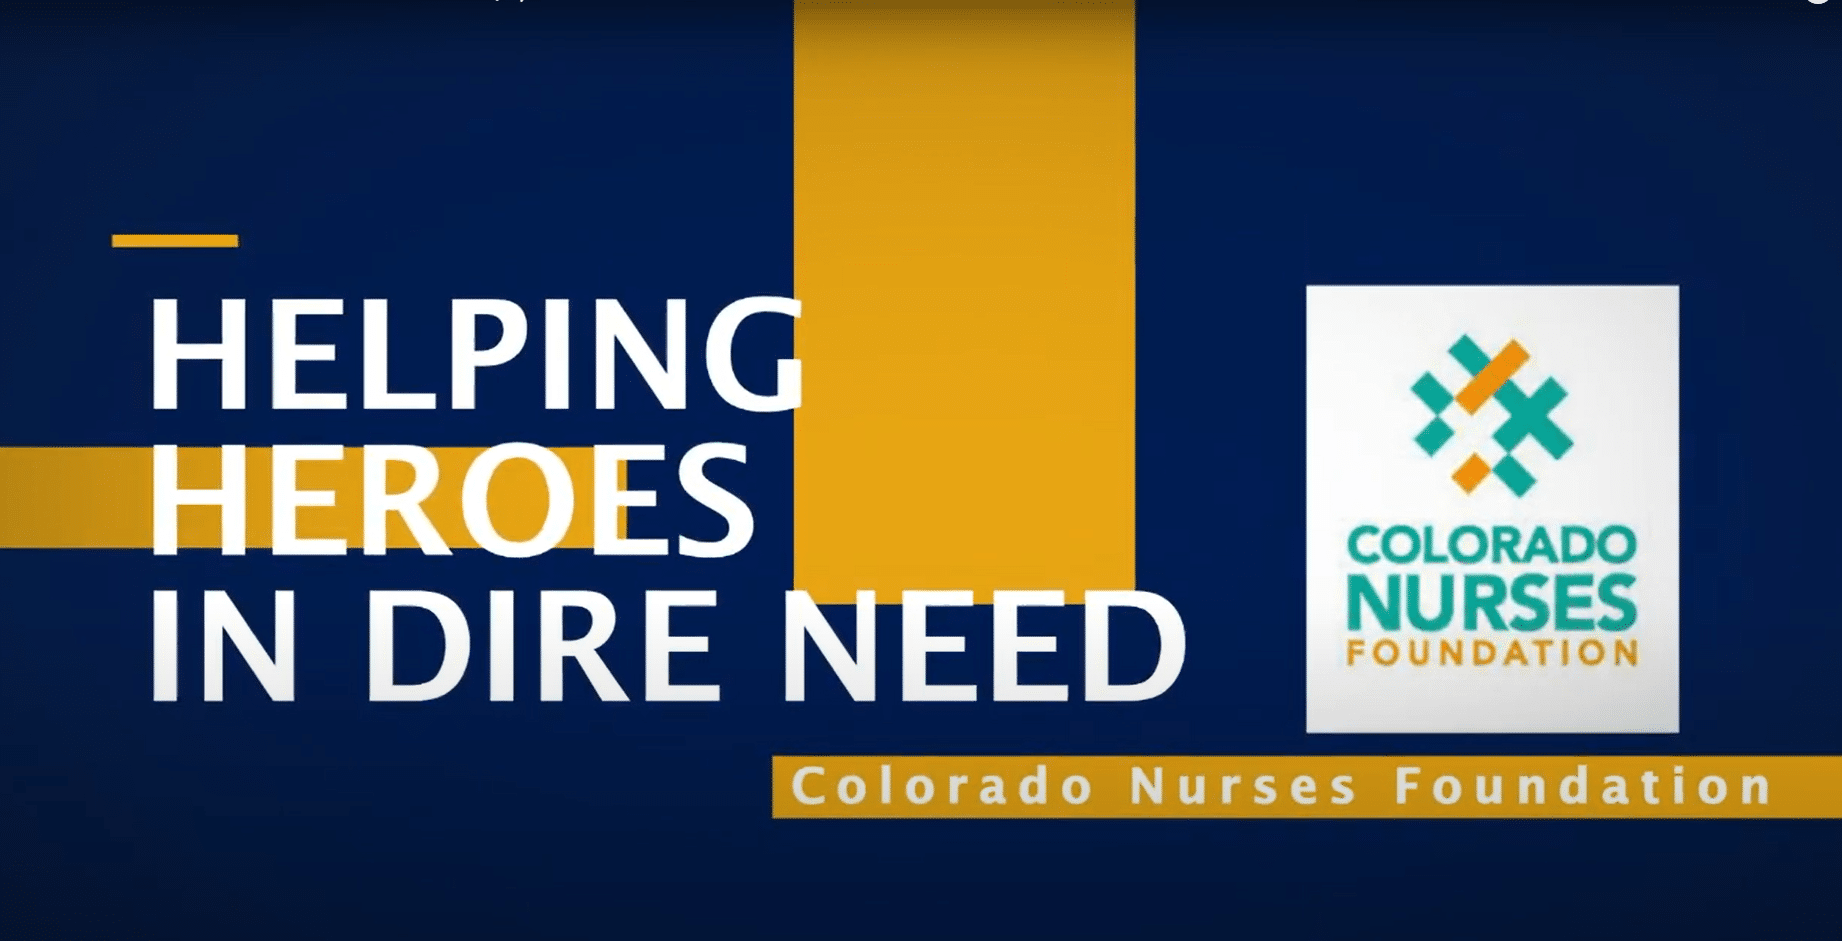 Helping Heroes in Dire Need in text next to the Colorado Nurses Foundation logo and title